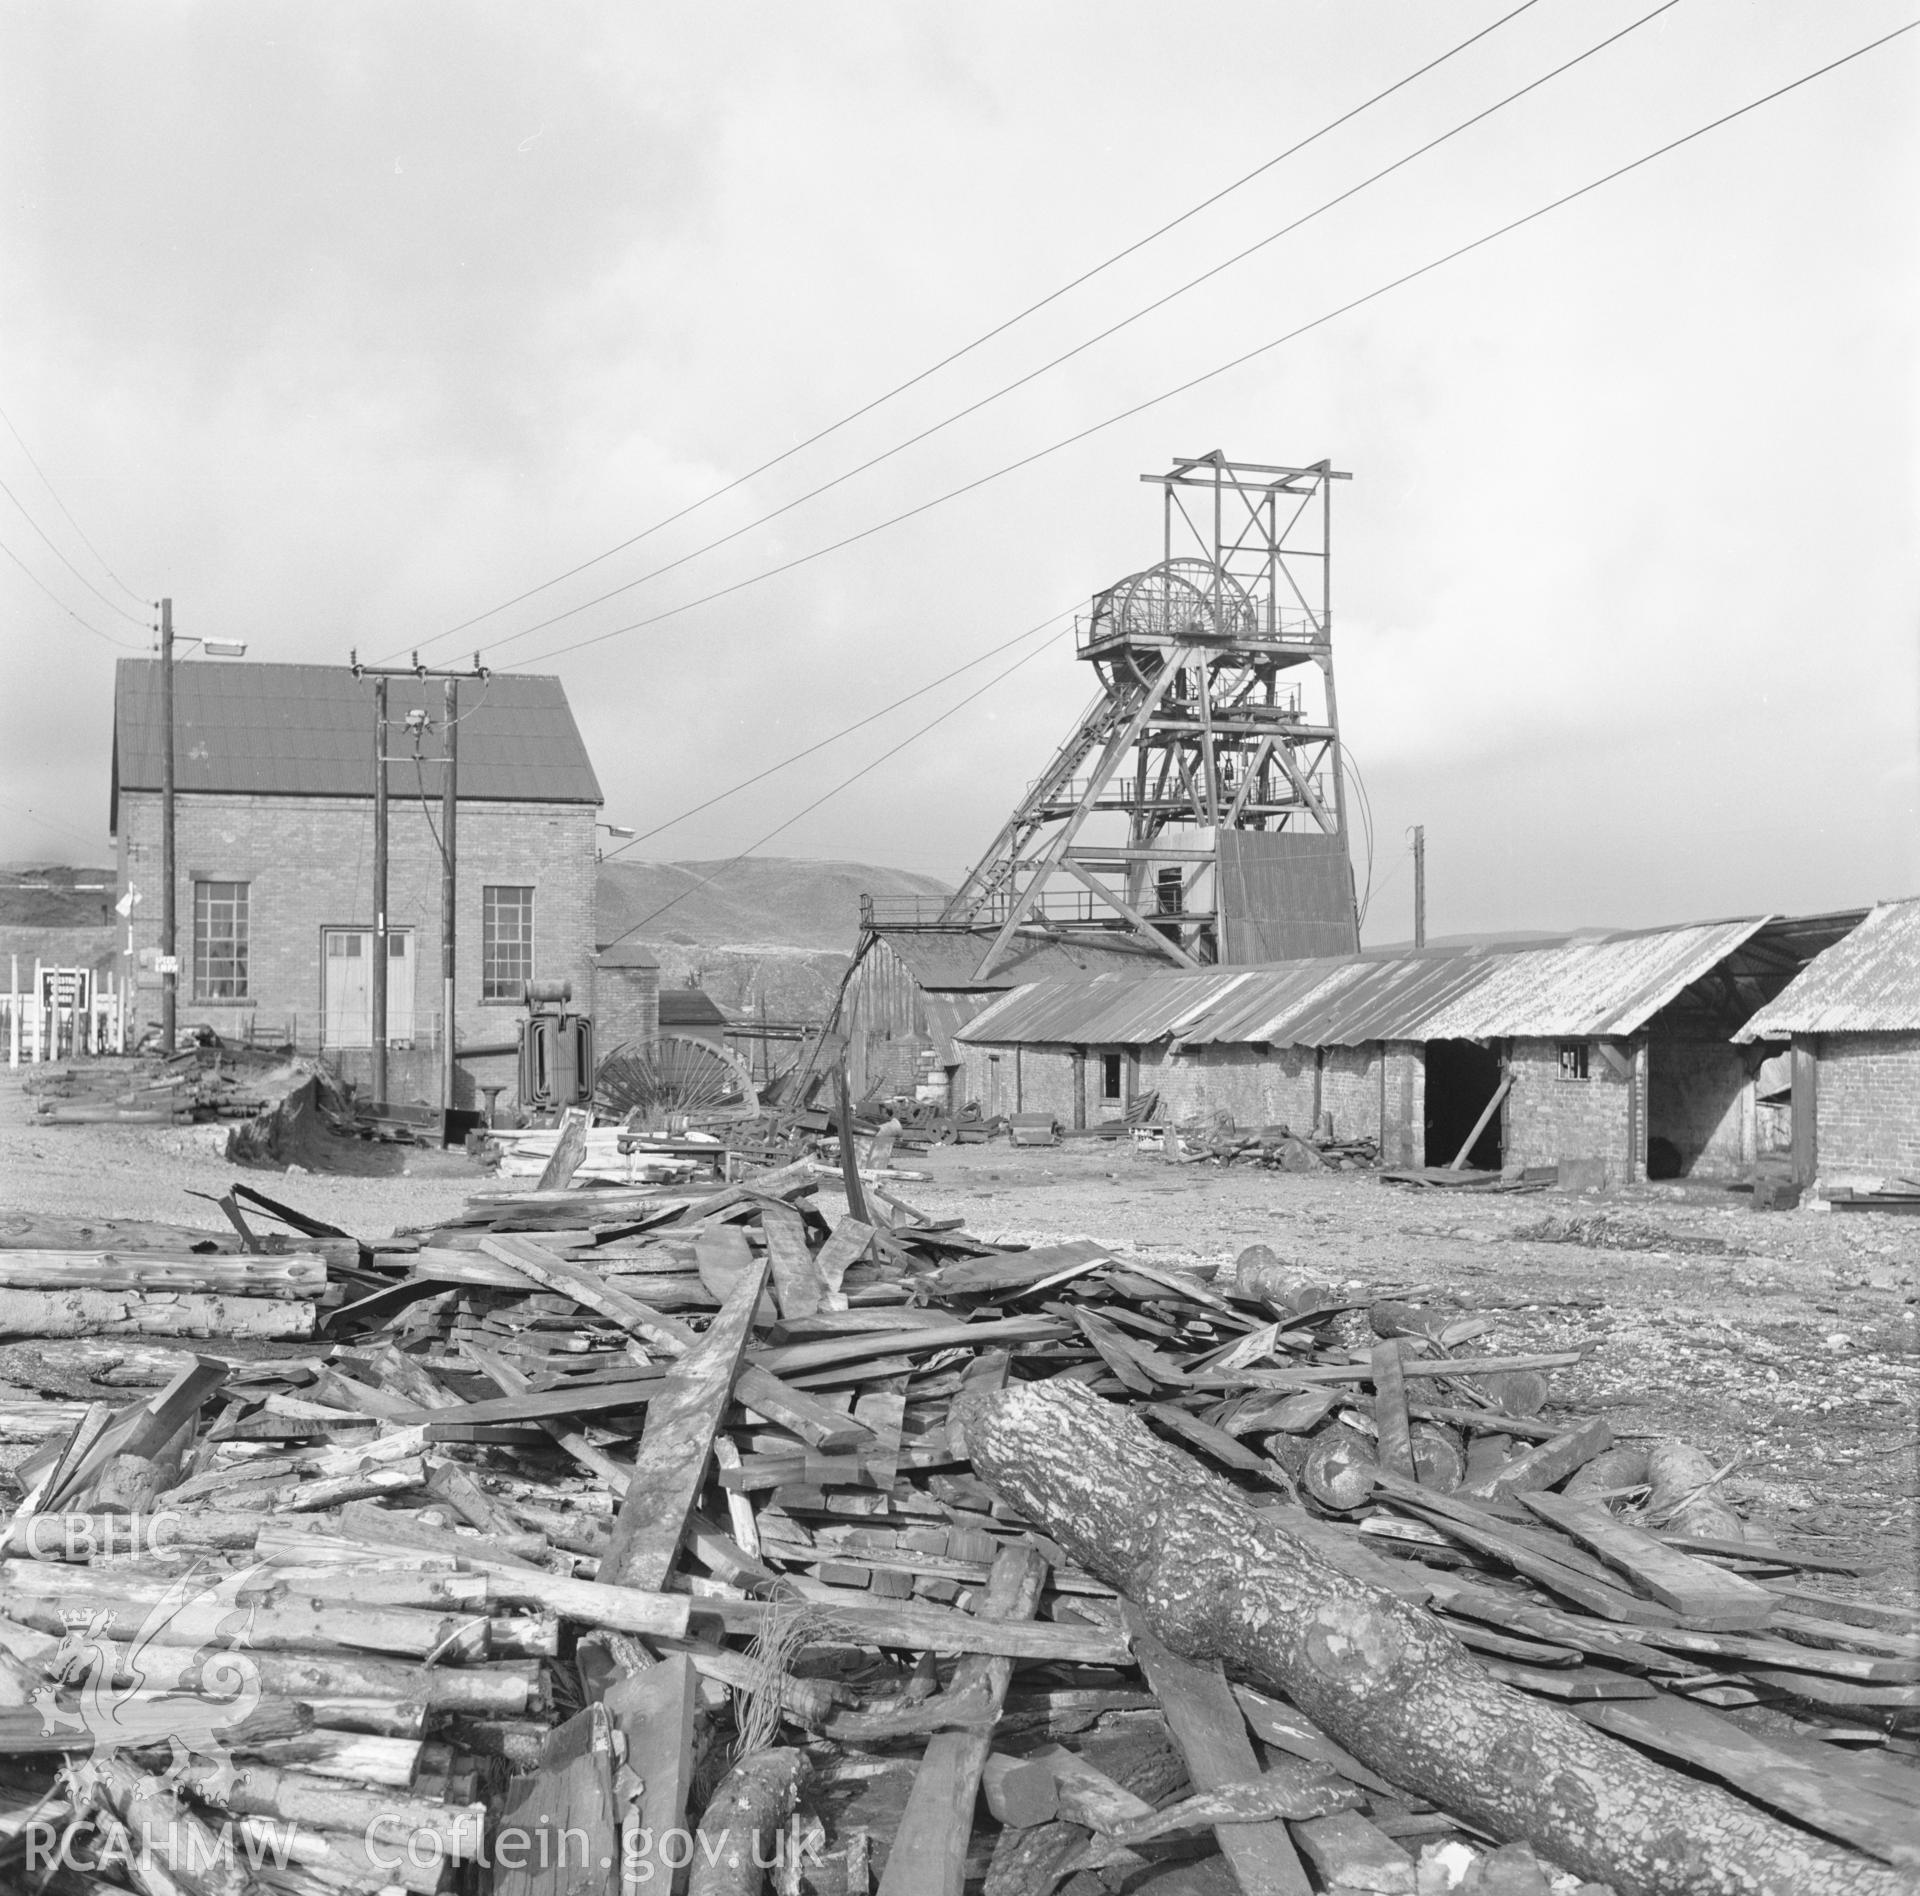 Digital copy of an acetate negative showing general view of colliery yard at Big Pit, from the John Cornwell Collection.